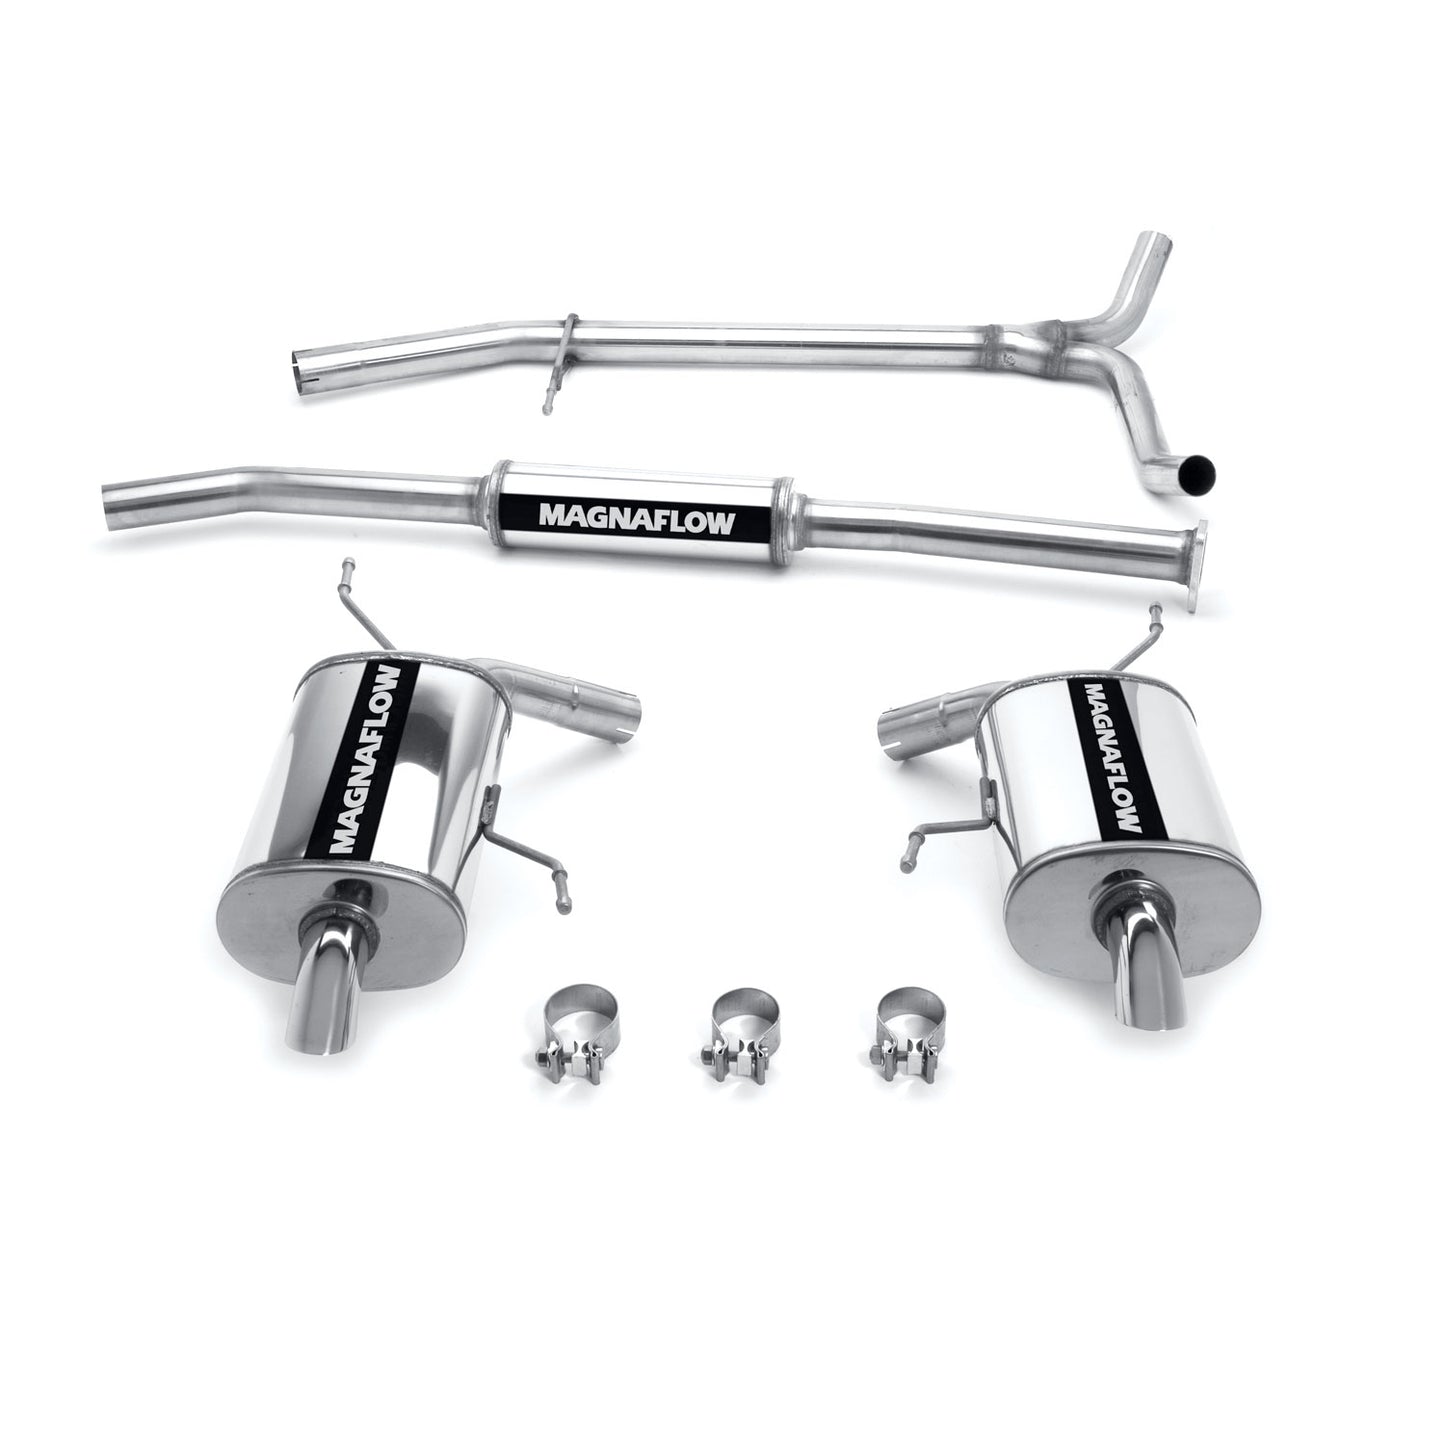 MagnaFlow Street Series Cat-Back Performance Exhaust System 15800